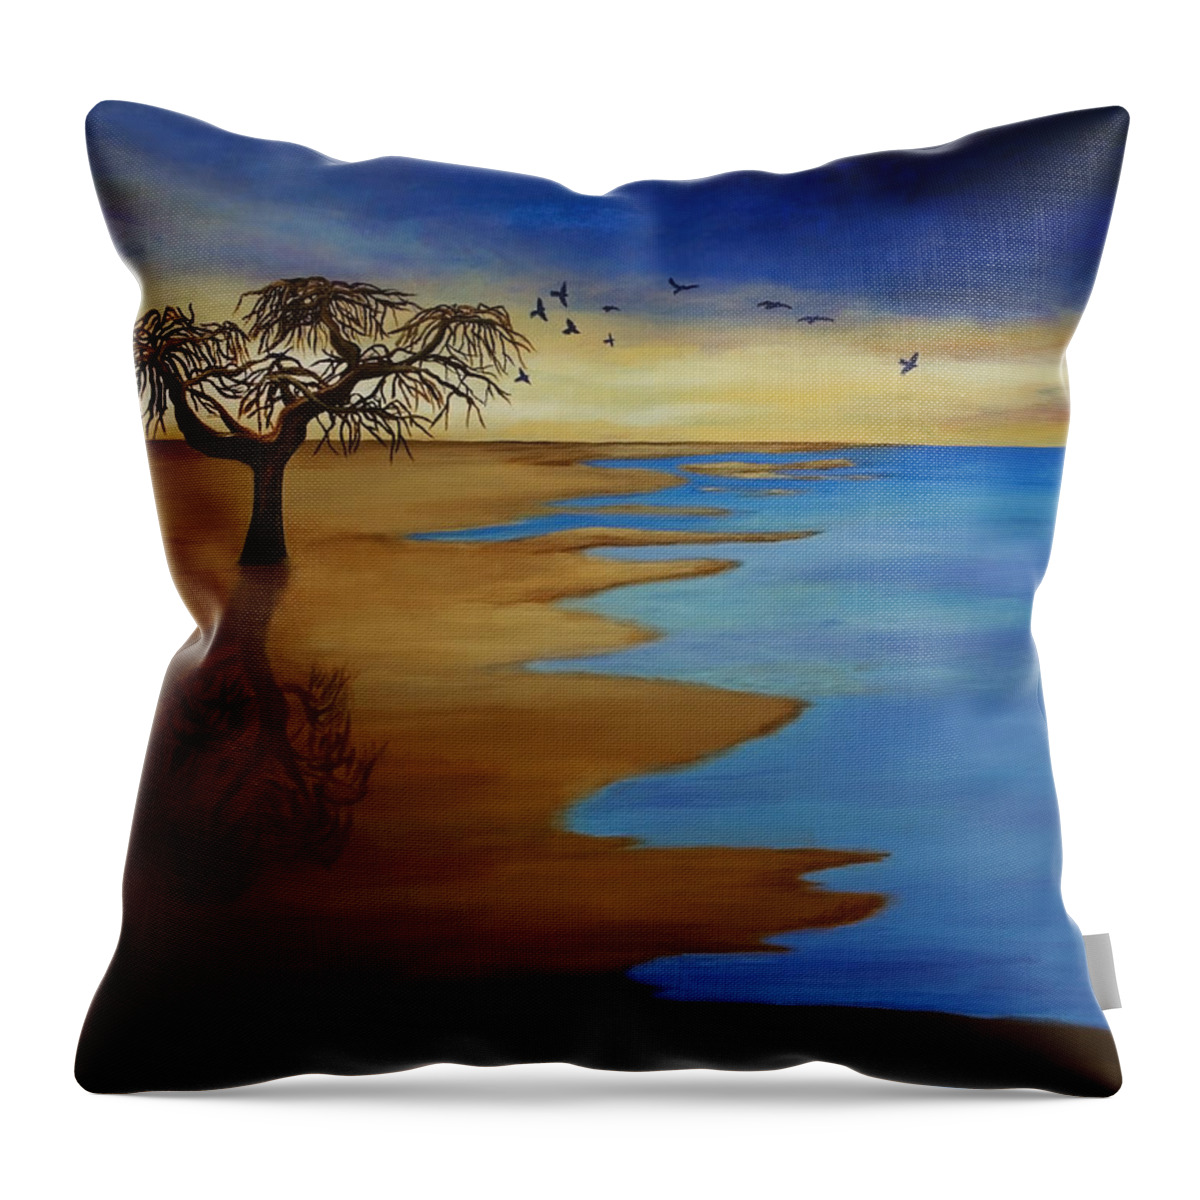 Acrylic Throw Pillow featuring the painting Solitude by Michelle Joseph-Long